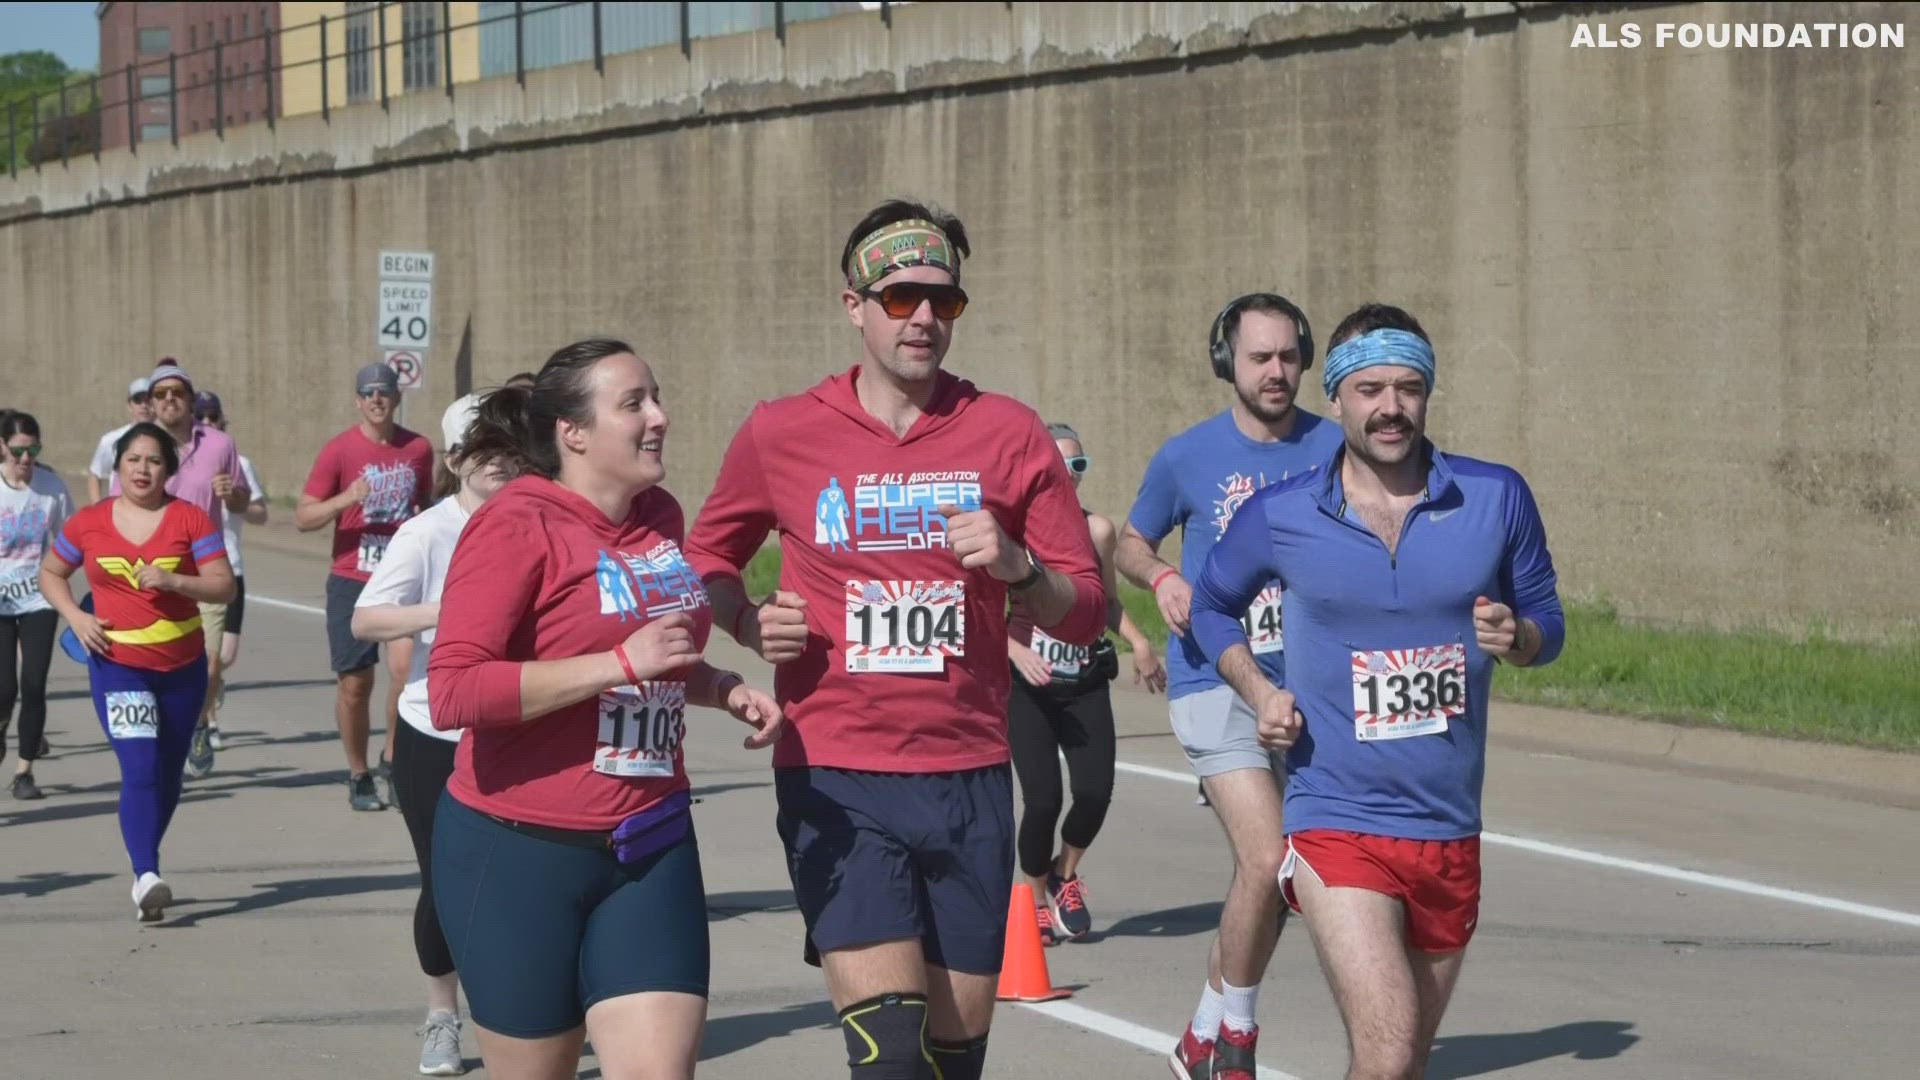 It's a fun run where participants can dress up as superheroes while supporting a great cause.